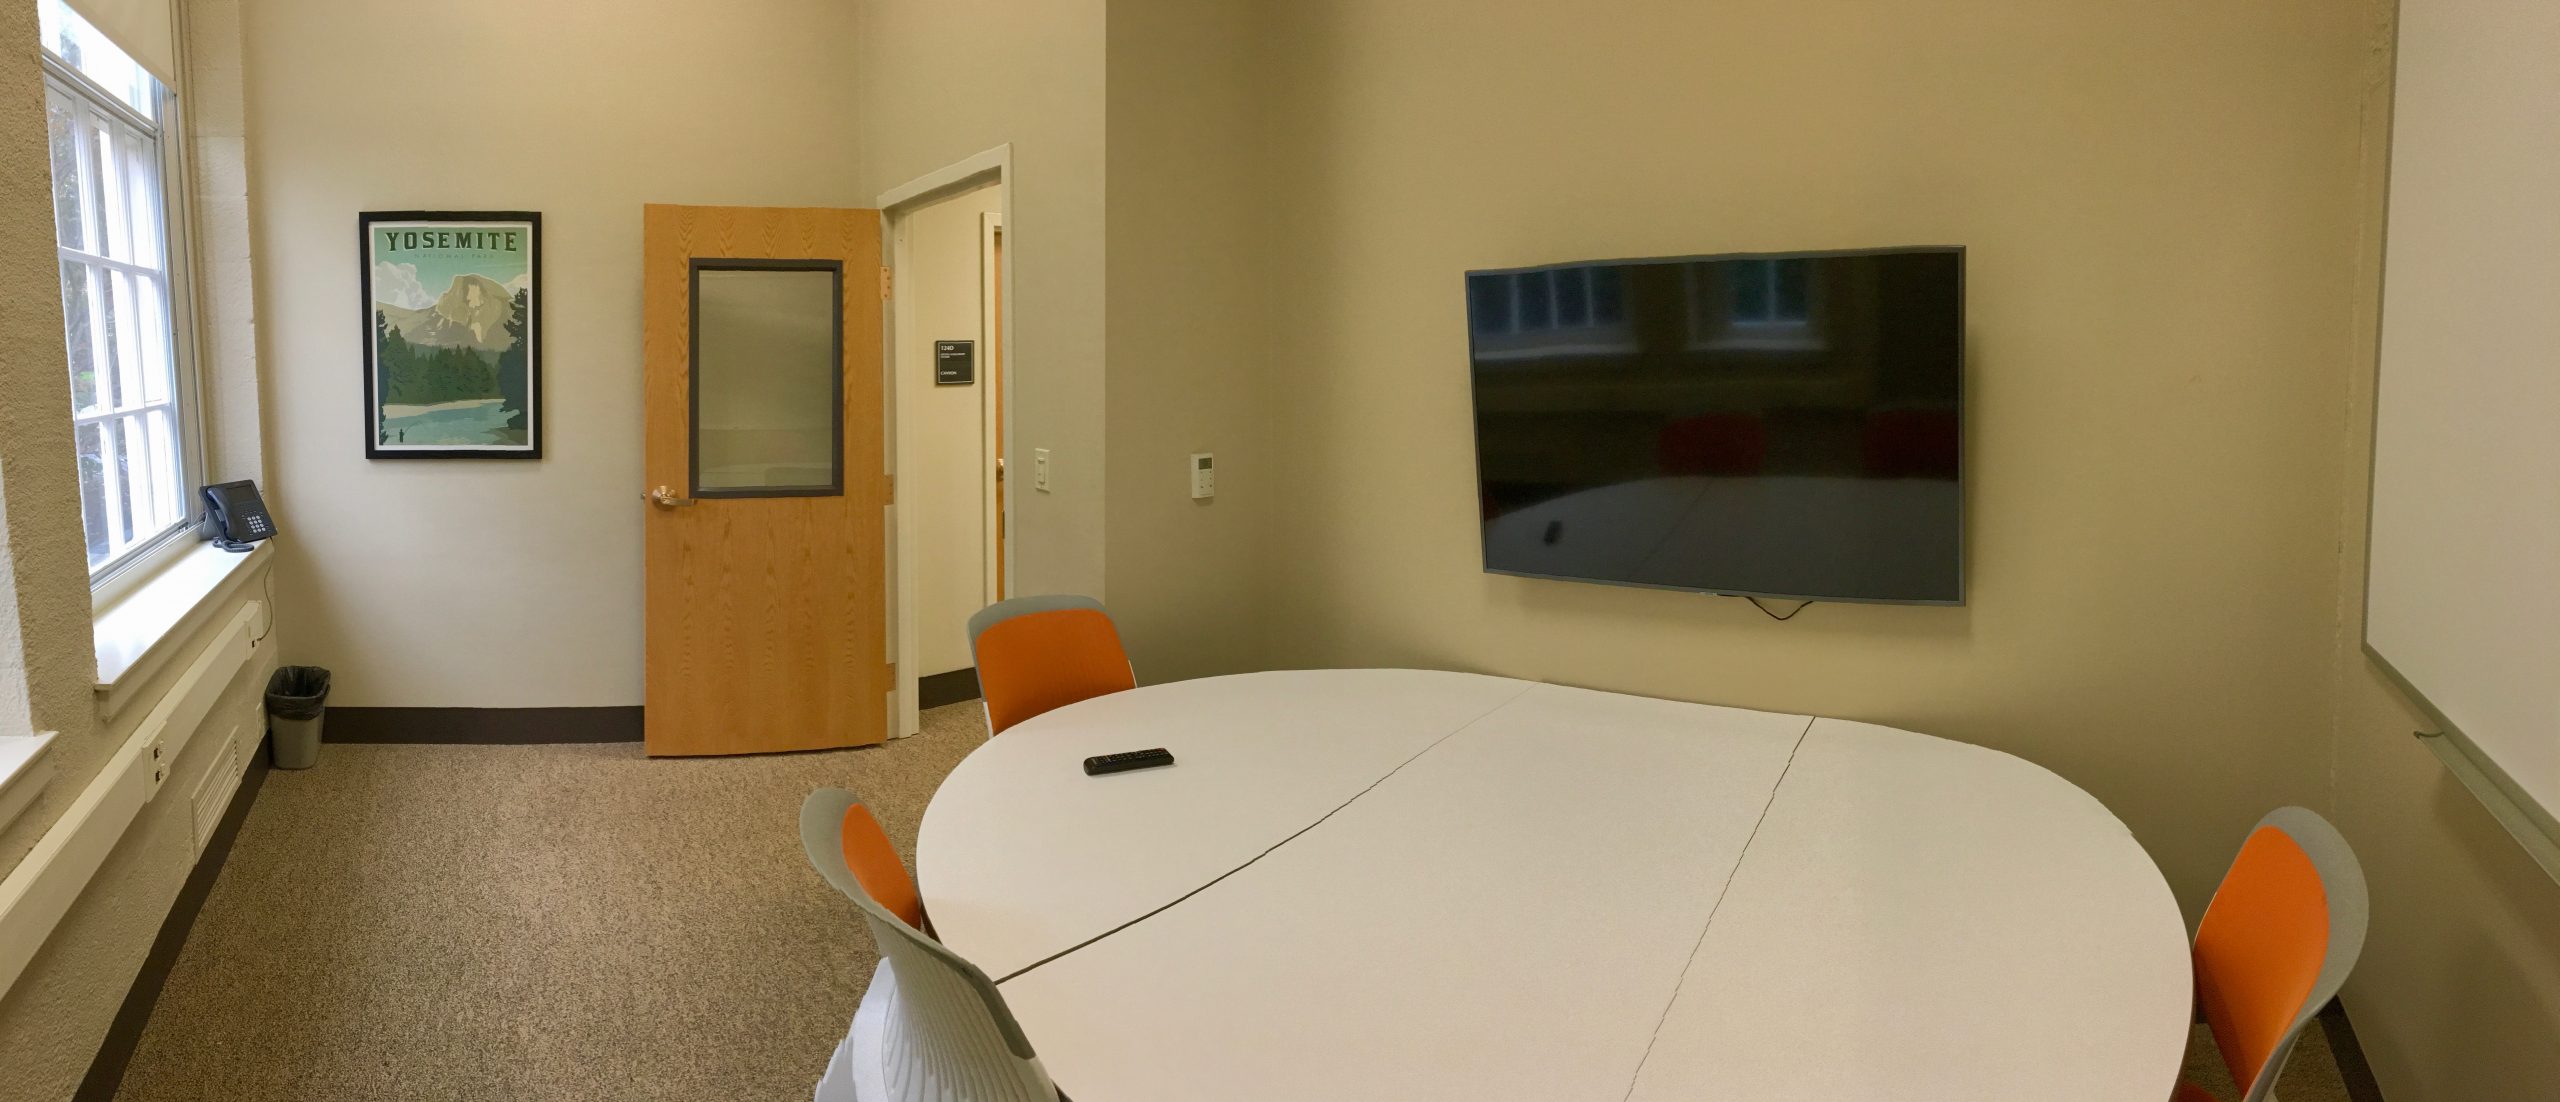 A study room with a table, white board, mounted screen, and four chairs